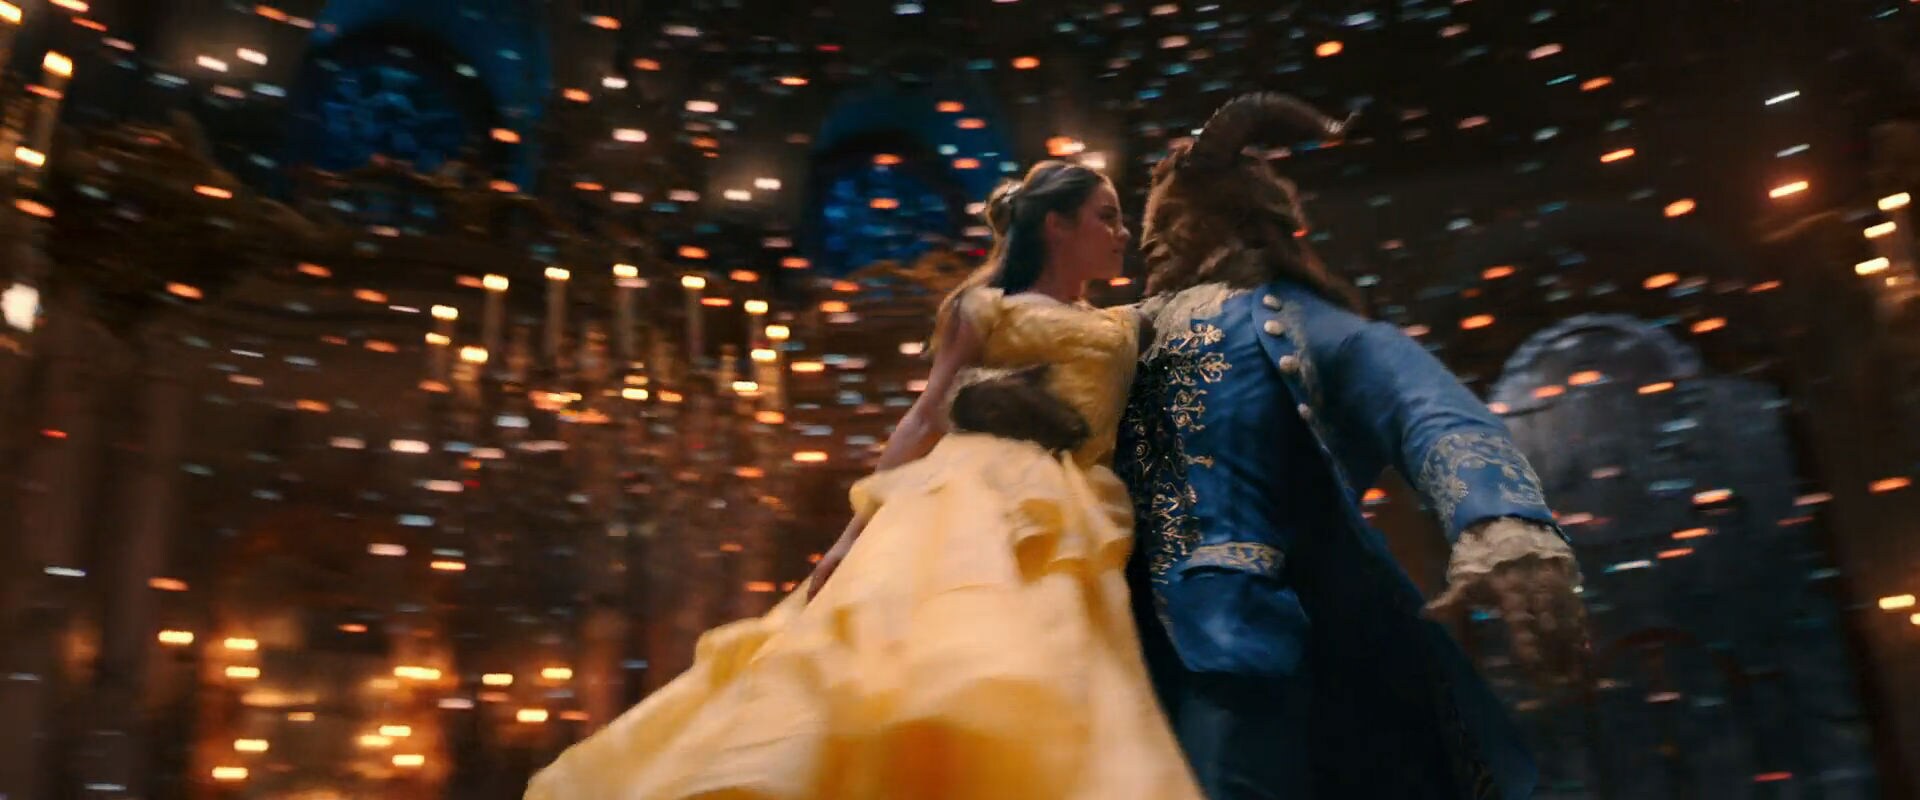 watch beauty and the beast 2017 full movie free online